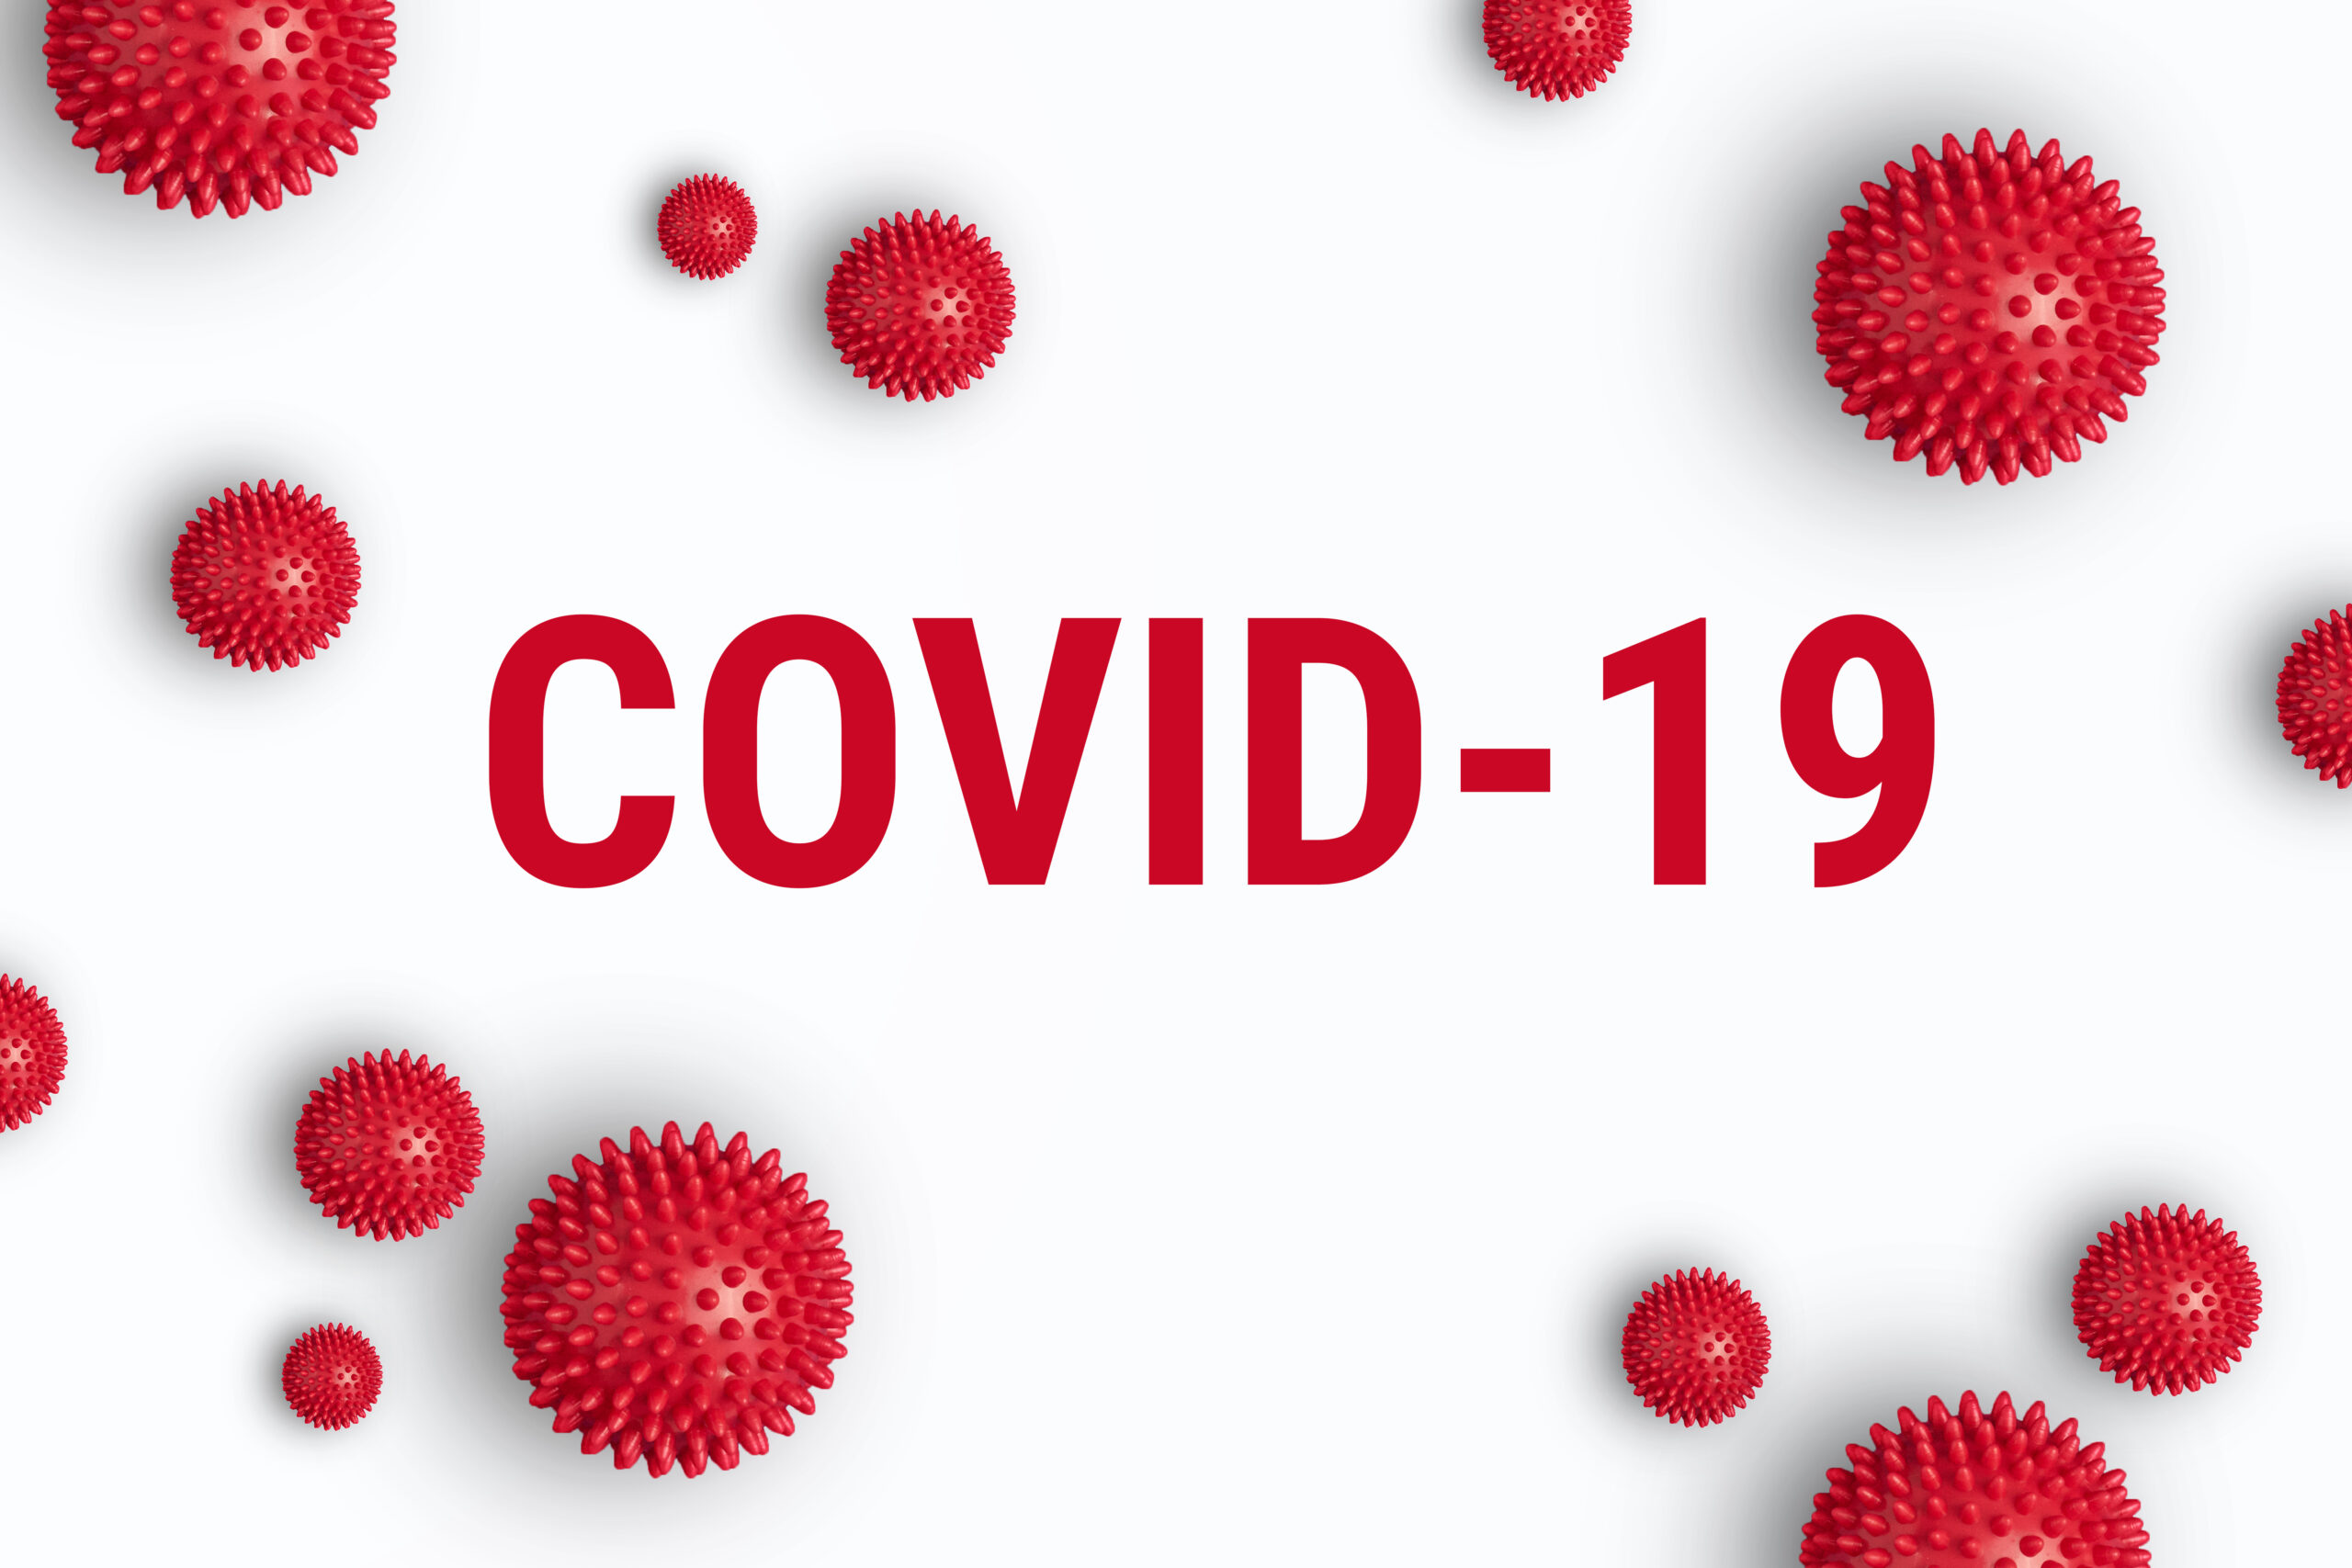 11covid-19 text and logo